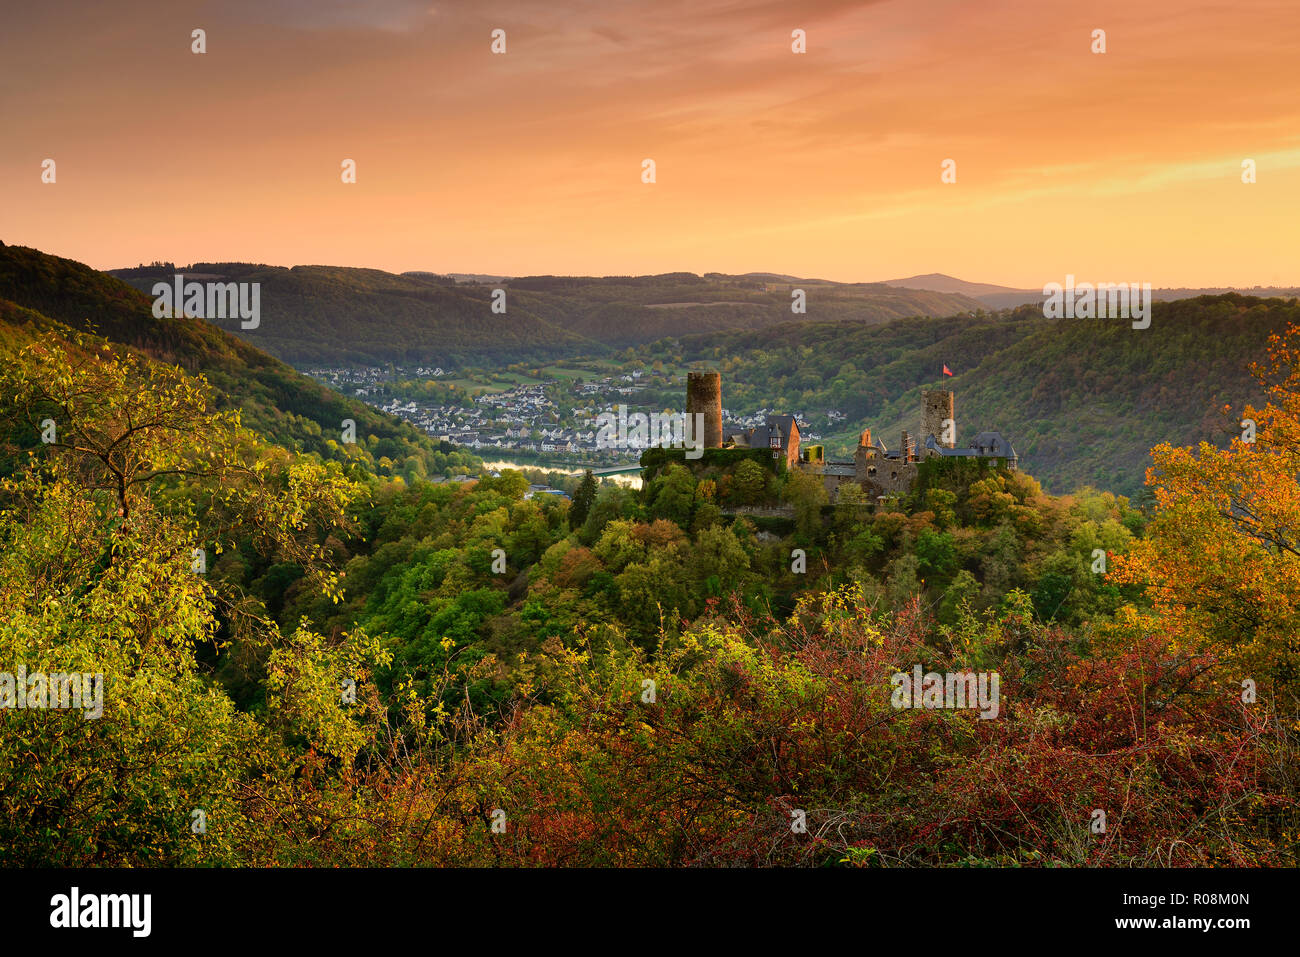 View of Thurant Castle in the Moselle Valley at sunset in autumn, Alken, Untermosel, Terrassenmosel, Rhineland-Palatinate Stock Photo